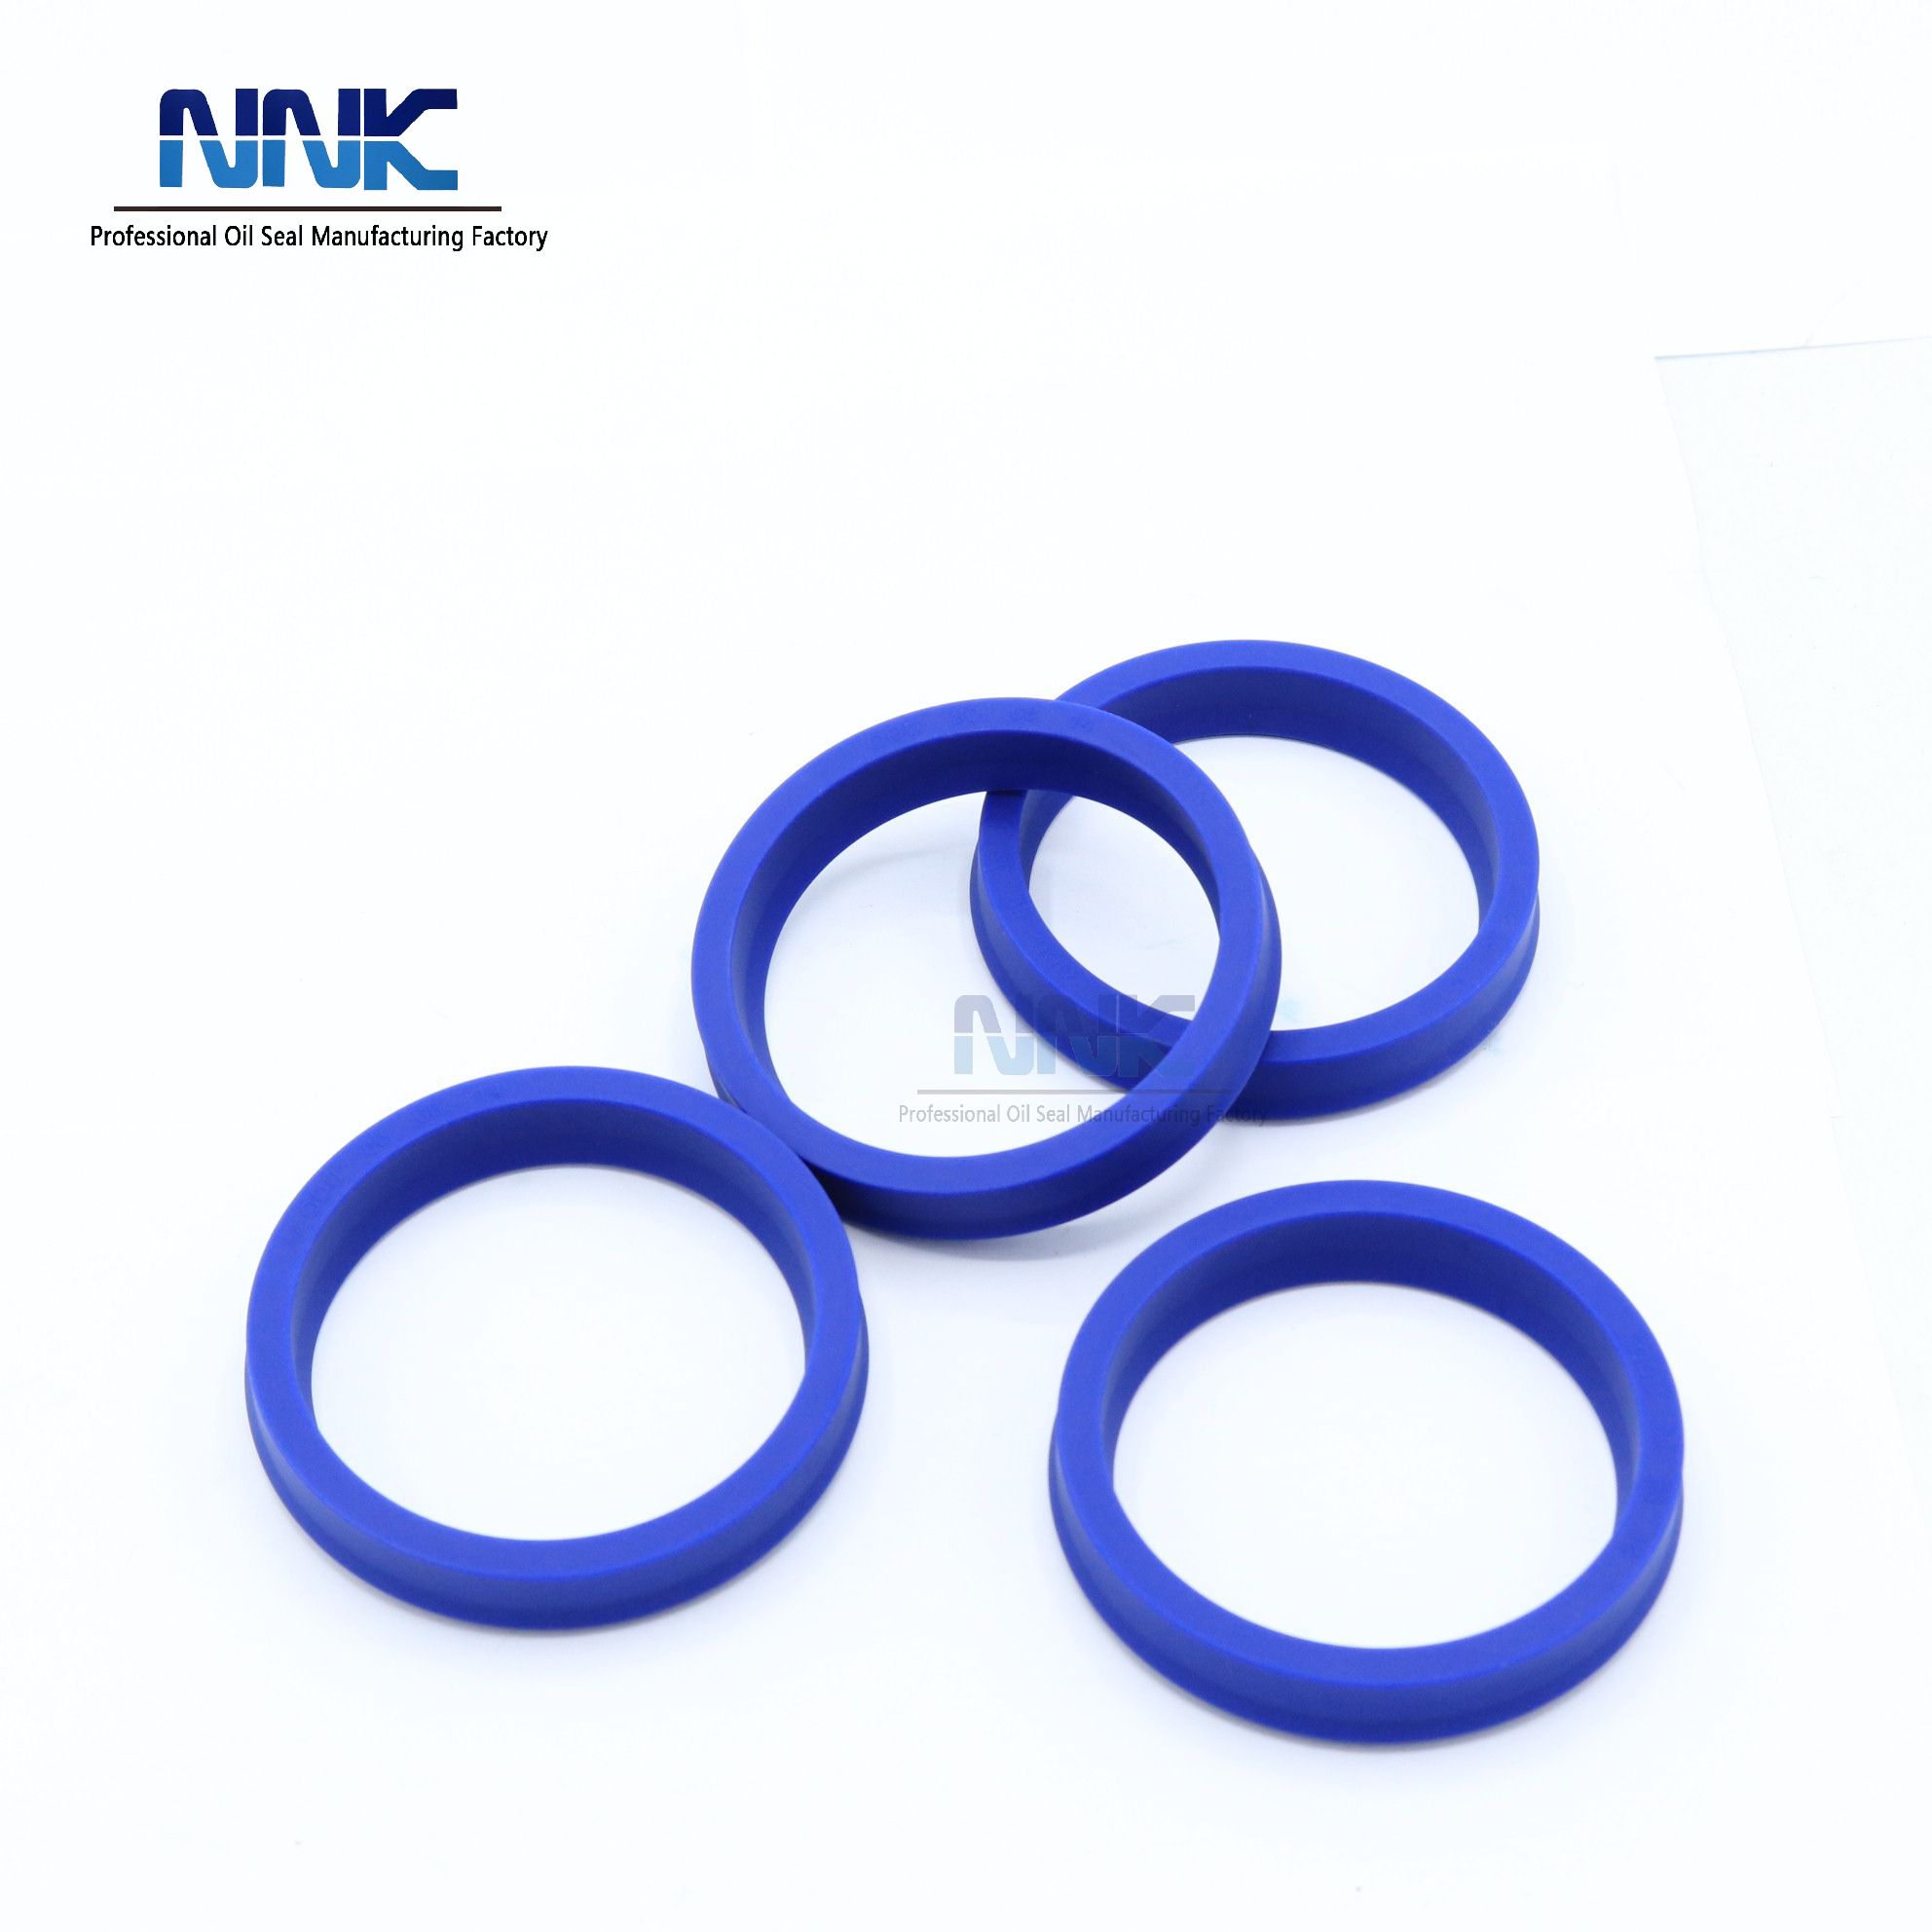 Oil Seals,O Rings,X Rings,Gaskets,Bushes,Diaphragms,Wipers,V Rings ,Boots,Bellows,Rubber to Metal Bonded Parts